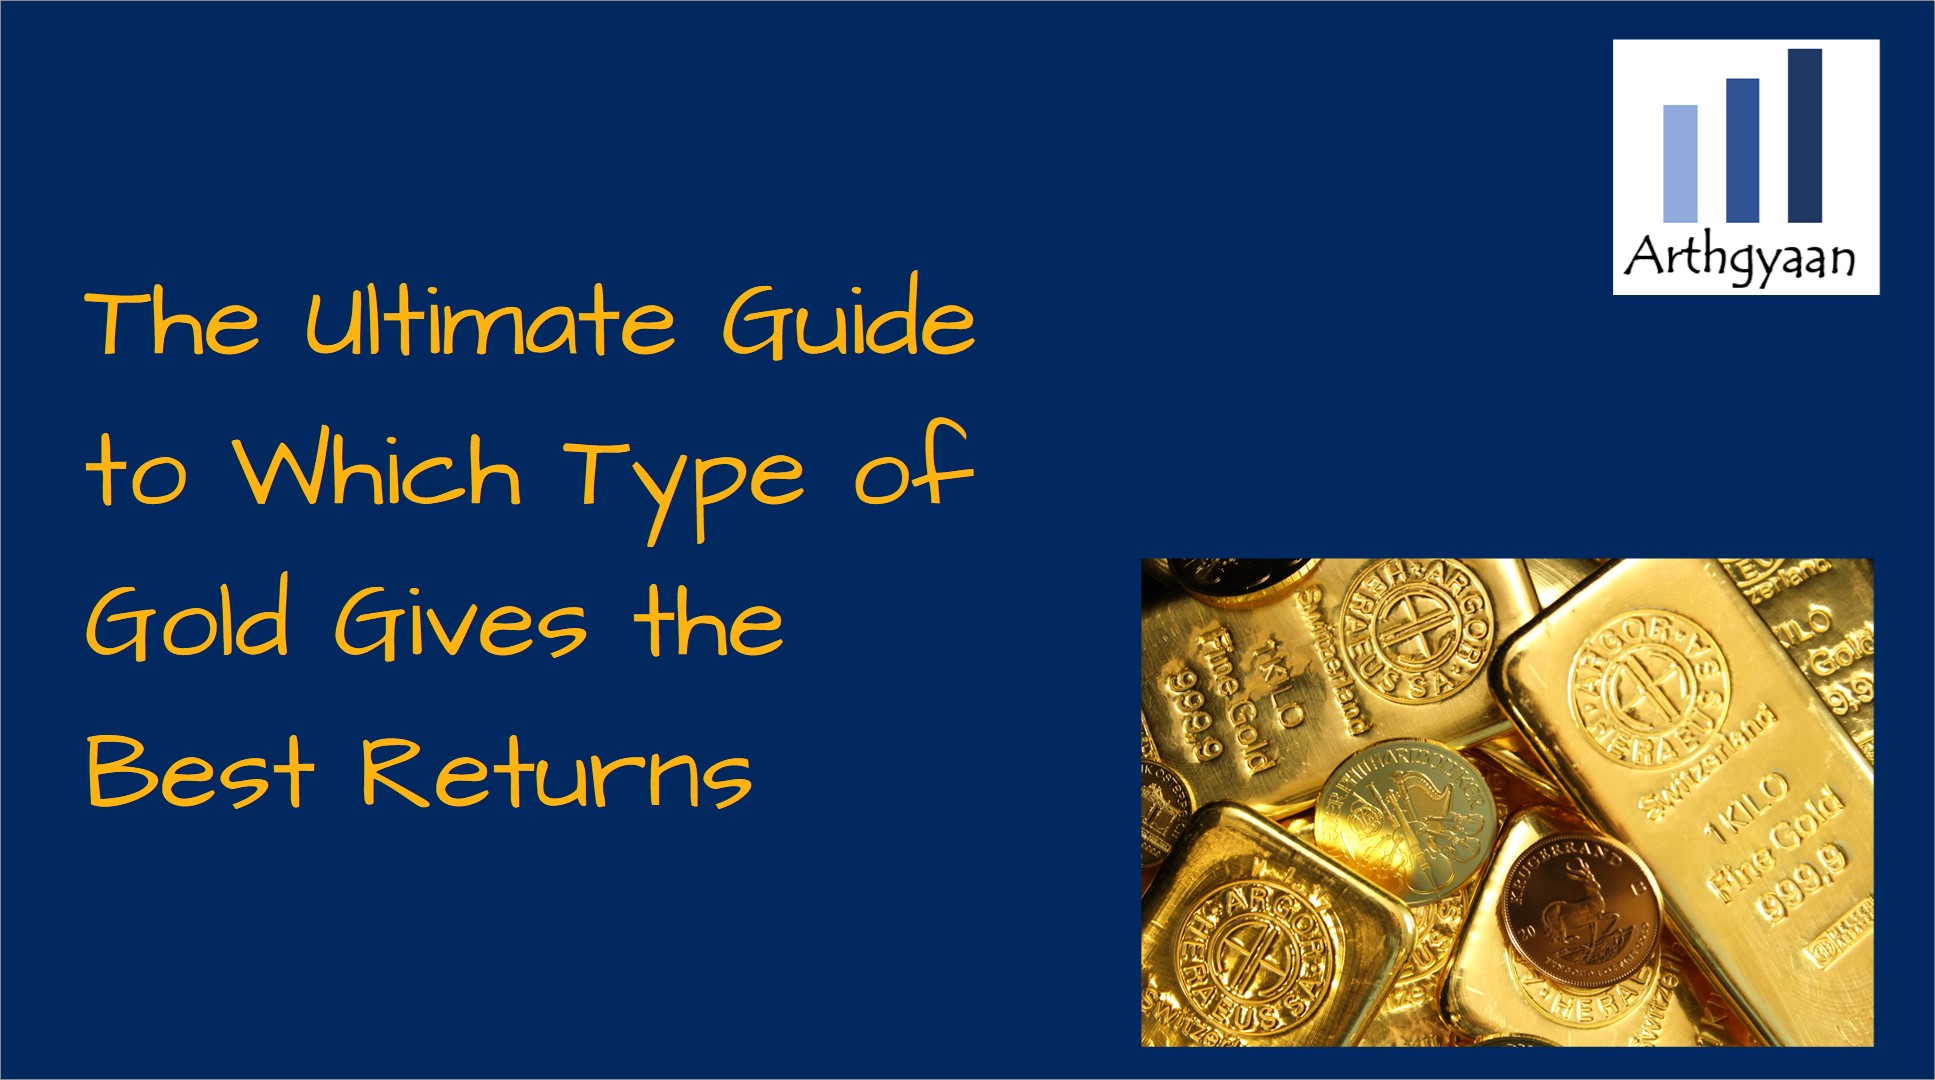 The Ultimate Guide to Which Type of Gold Gives the Best Returns